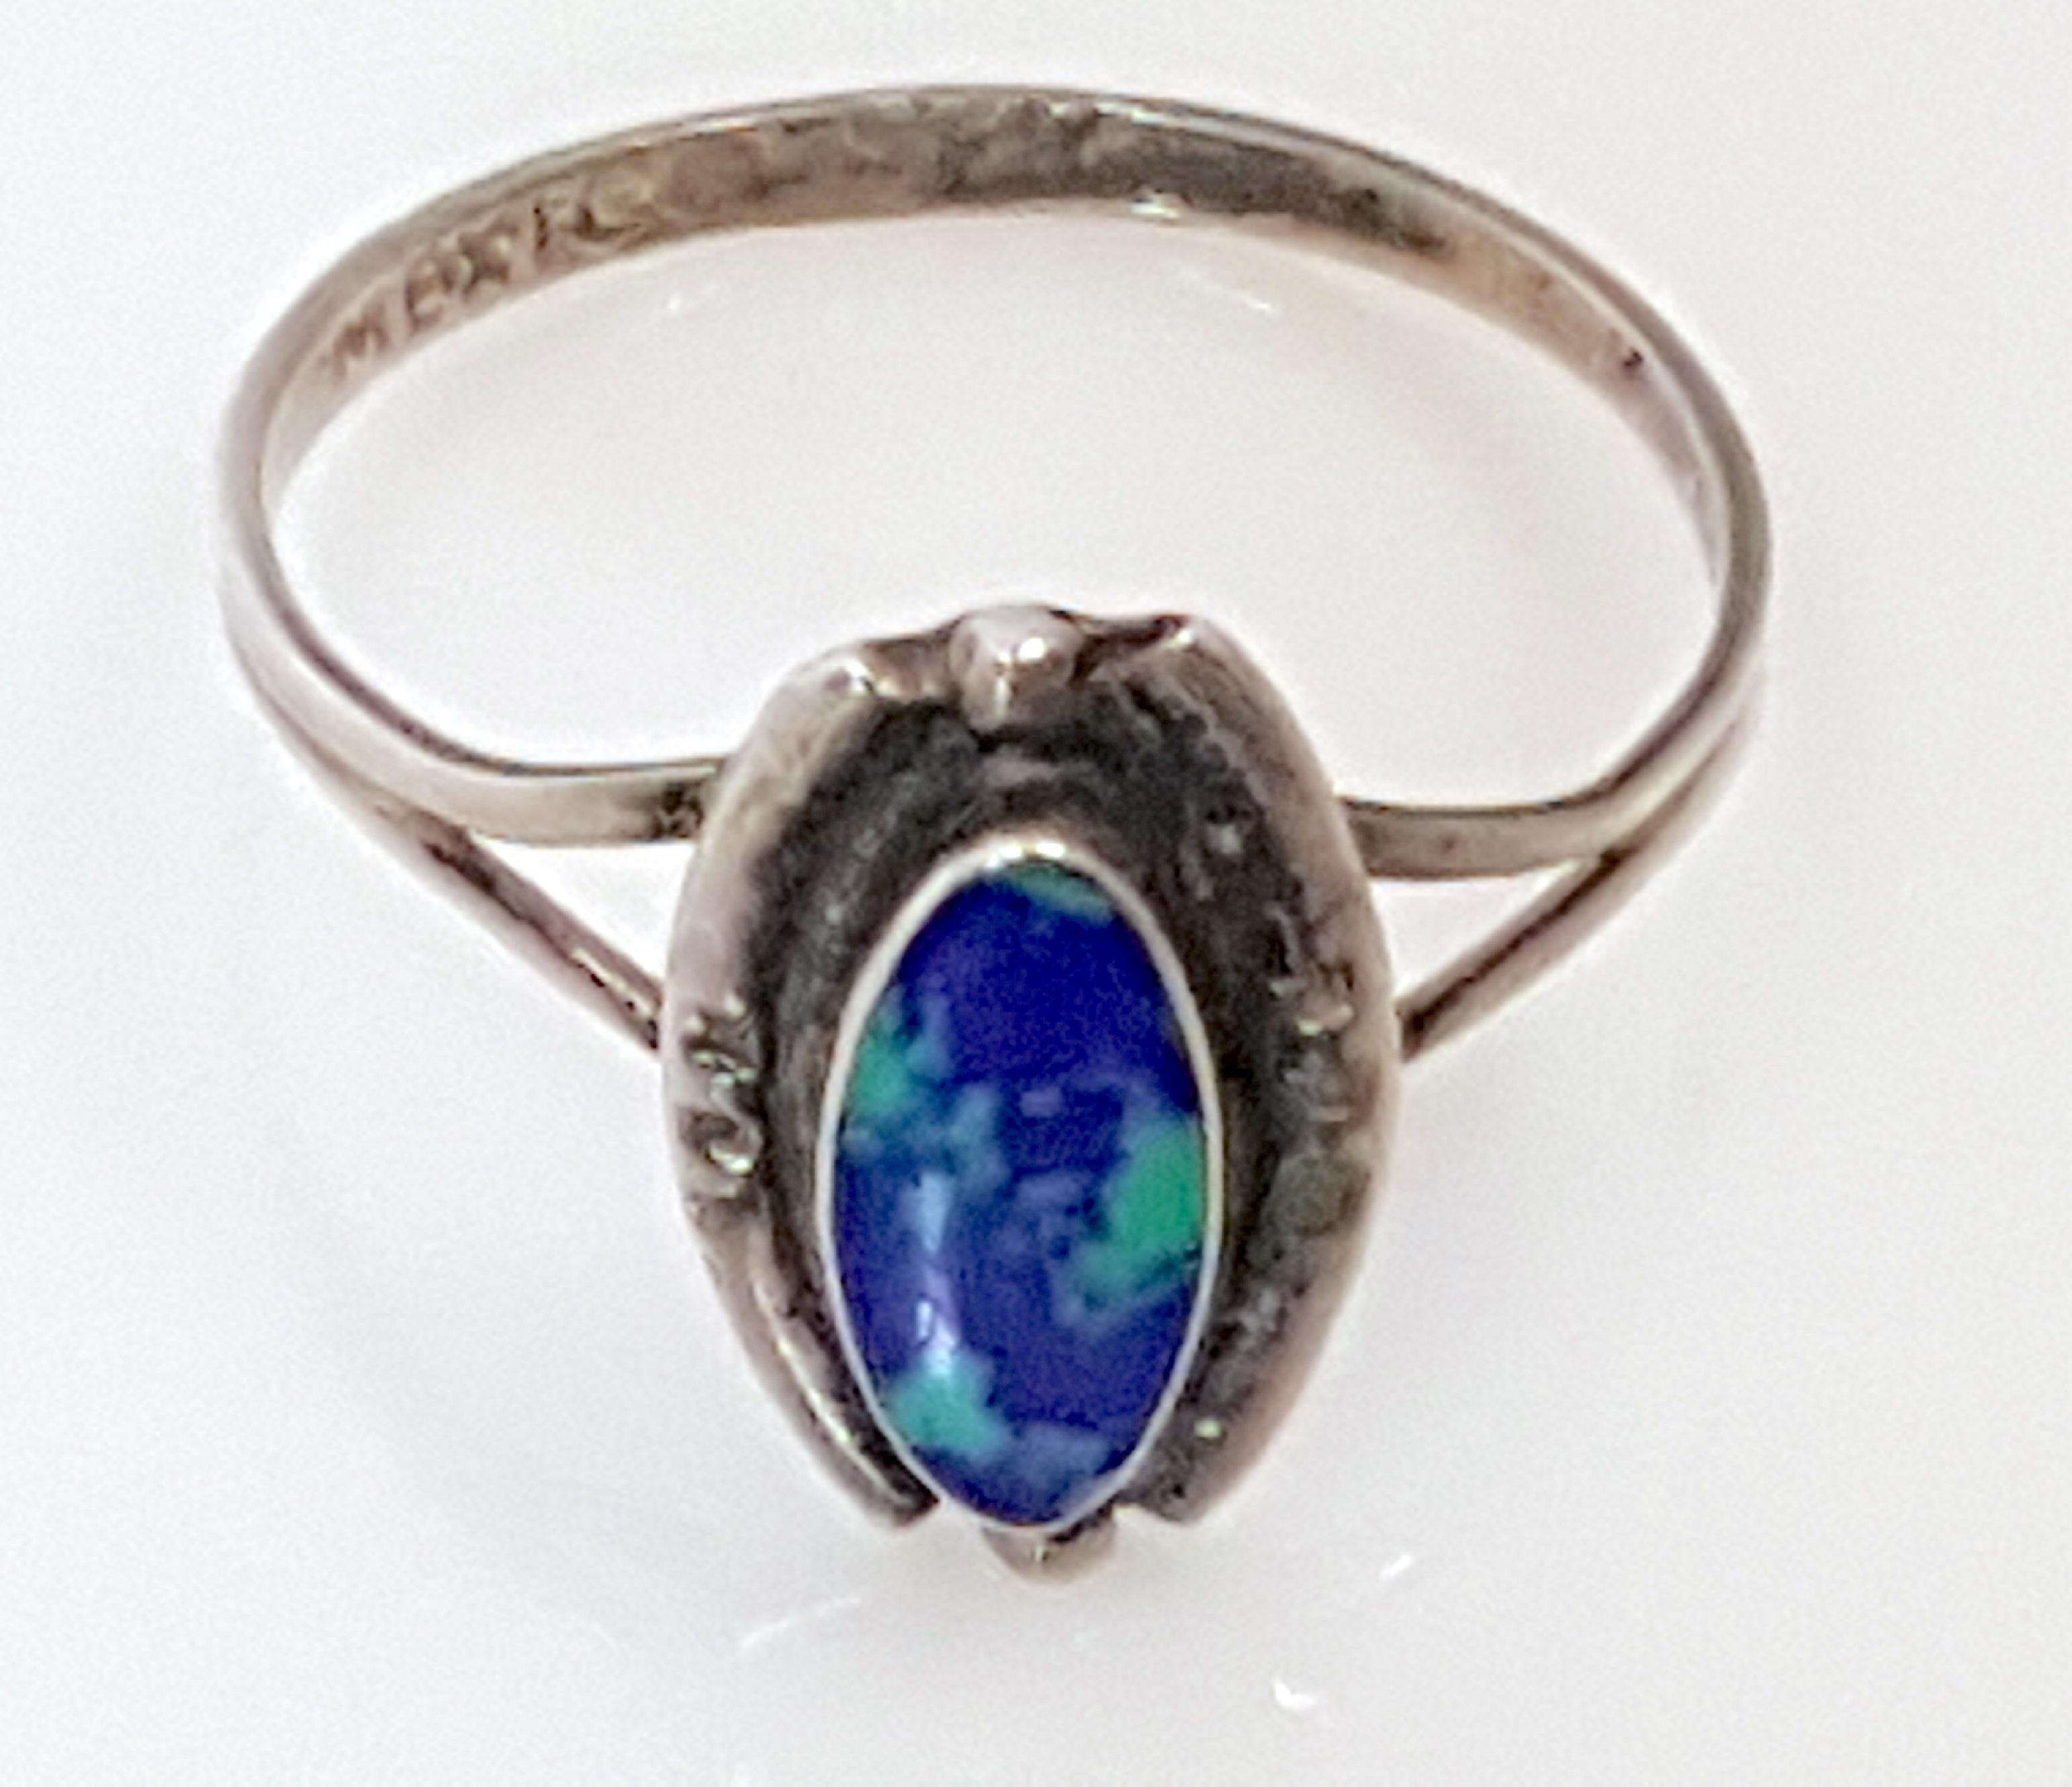 First appearing like an intense green-blue black opal without the flash, this antique natural azurmalachite oval-cut 10mm cabochon in a bezel setting features curvaceous vivid-green malachite clusters without striation pseudomorphed among